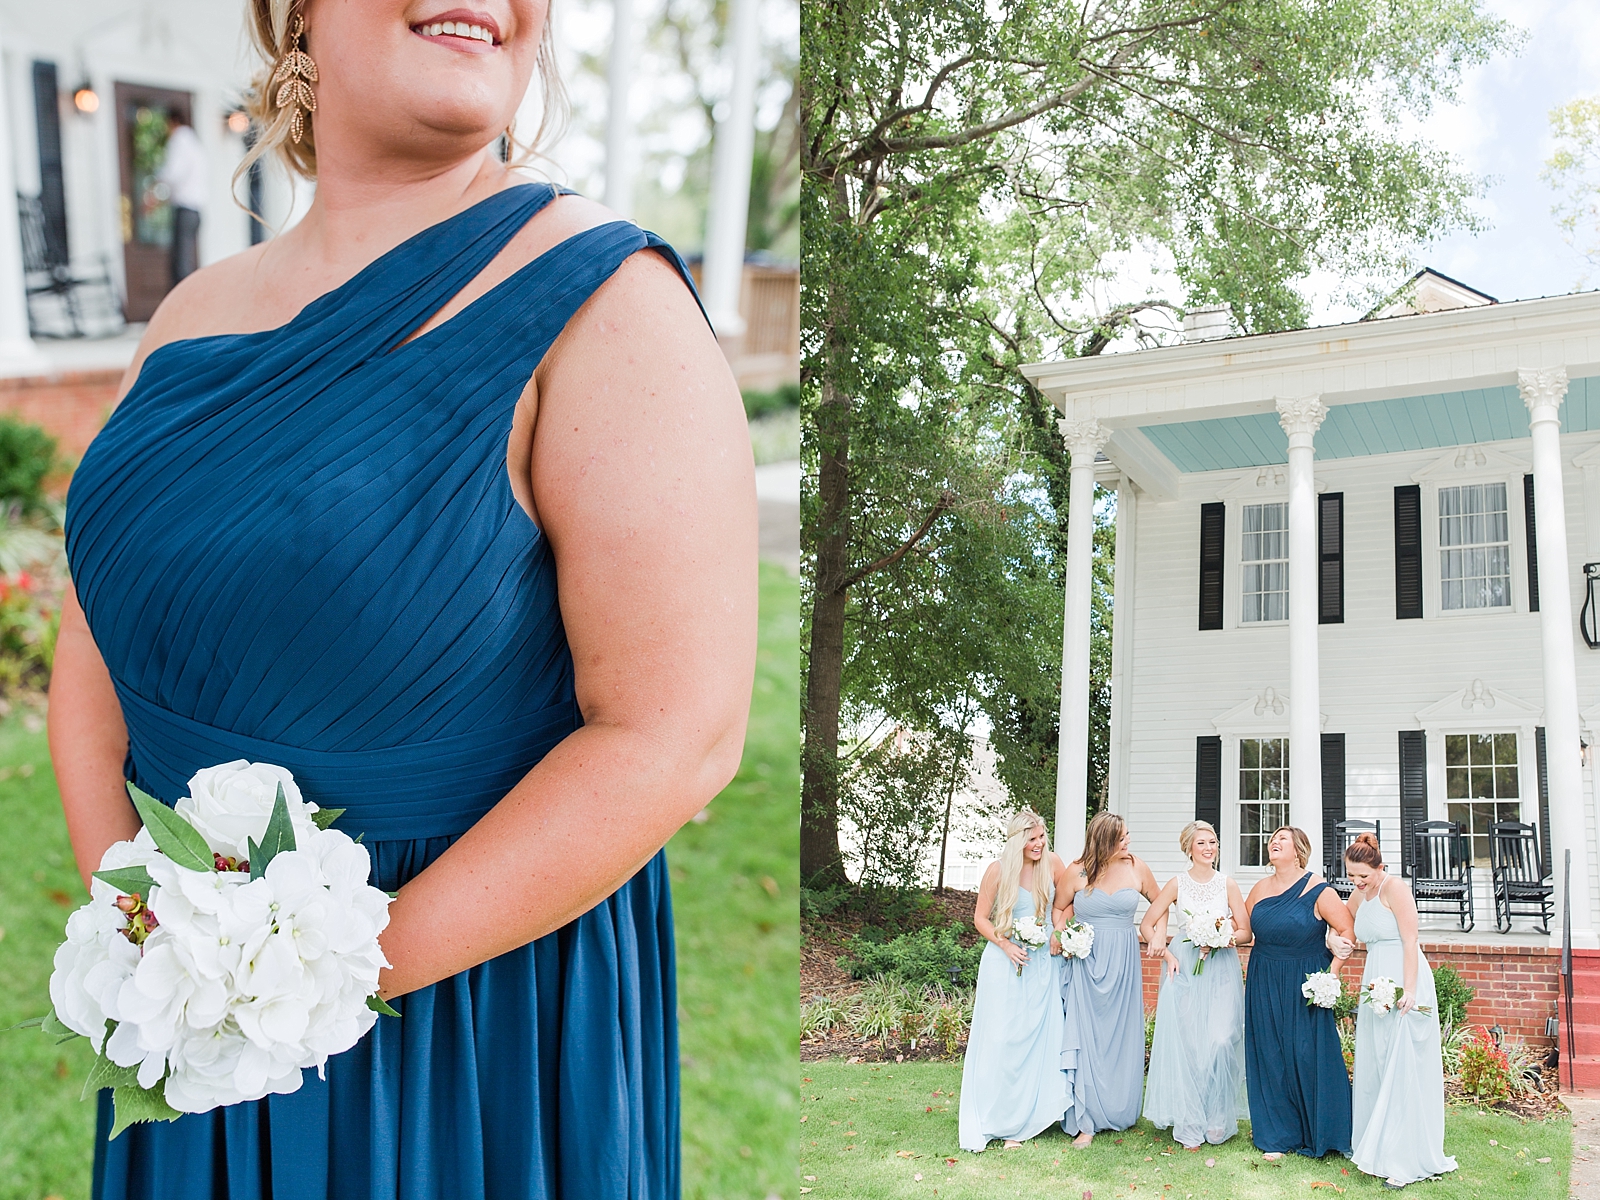 Dahlonega Wedding Venue Maid of Honor Flower Detail and Bride laughing and walking with Bridesmaids Photos